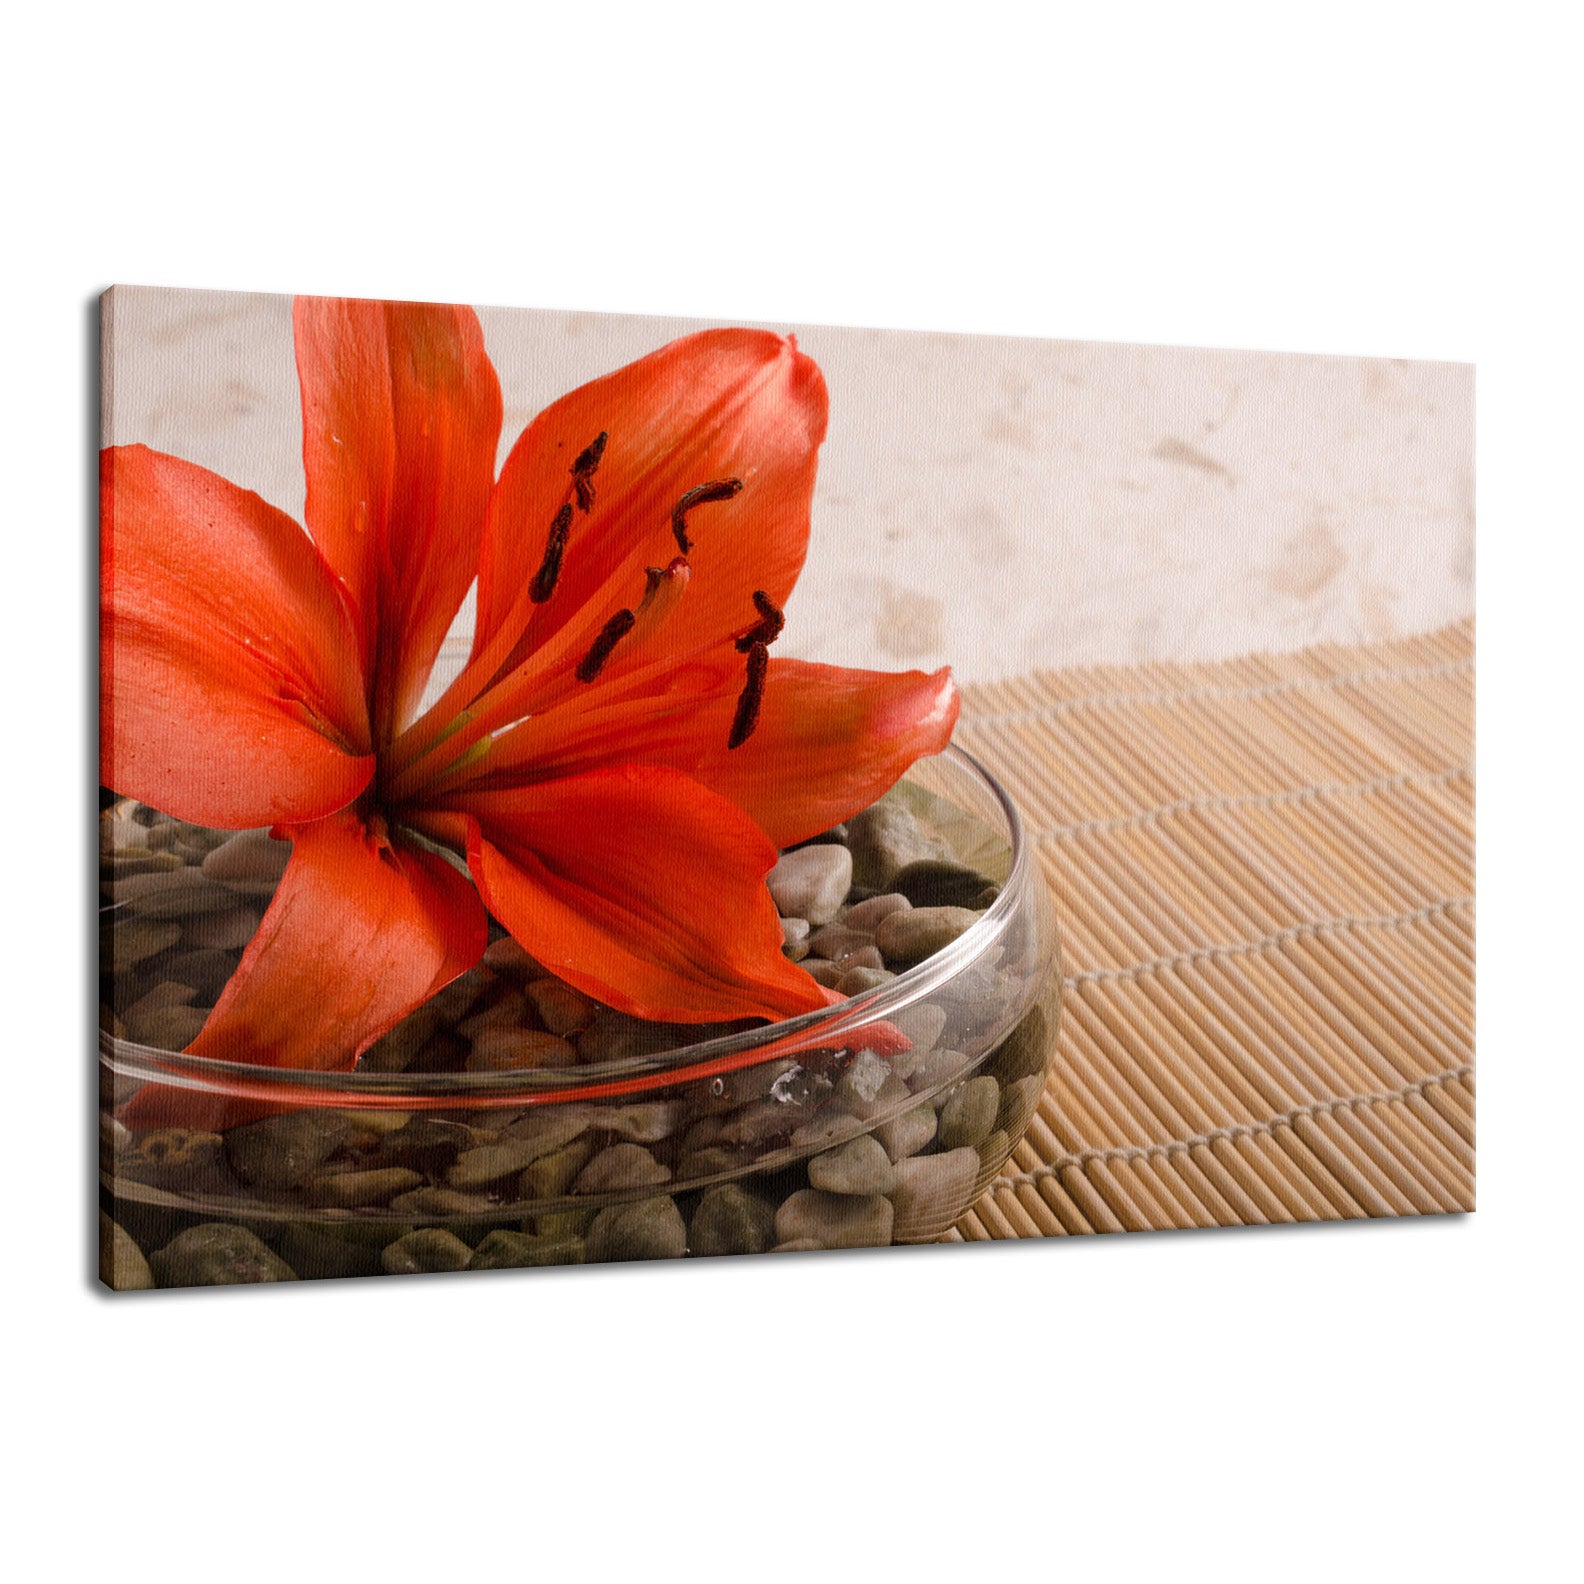 Tranquil Lily Nature / Floral Photo Fine Art Canvas Wall Art Prints  - PIPAFINEART